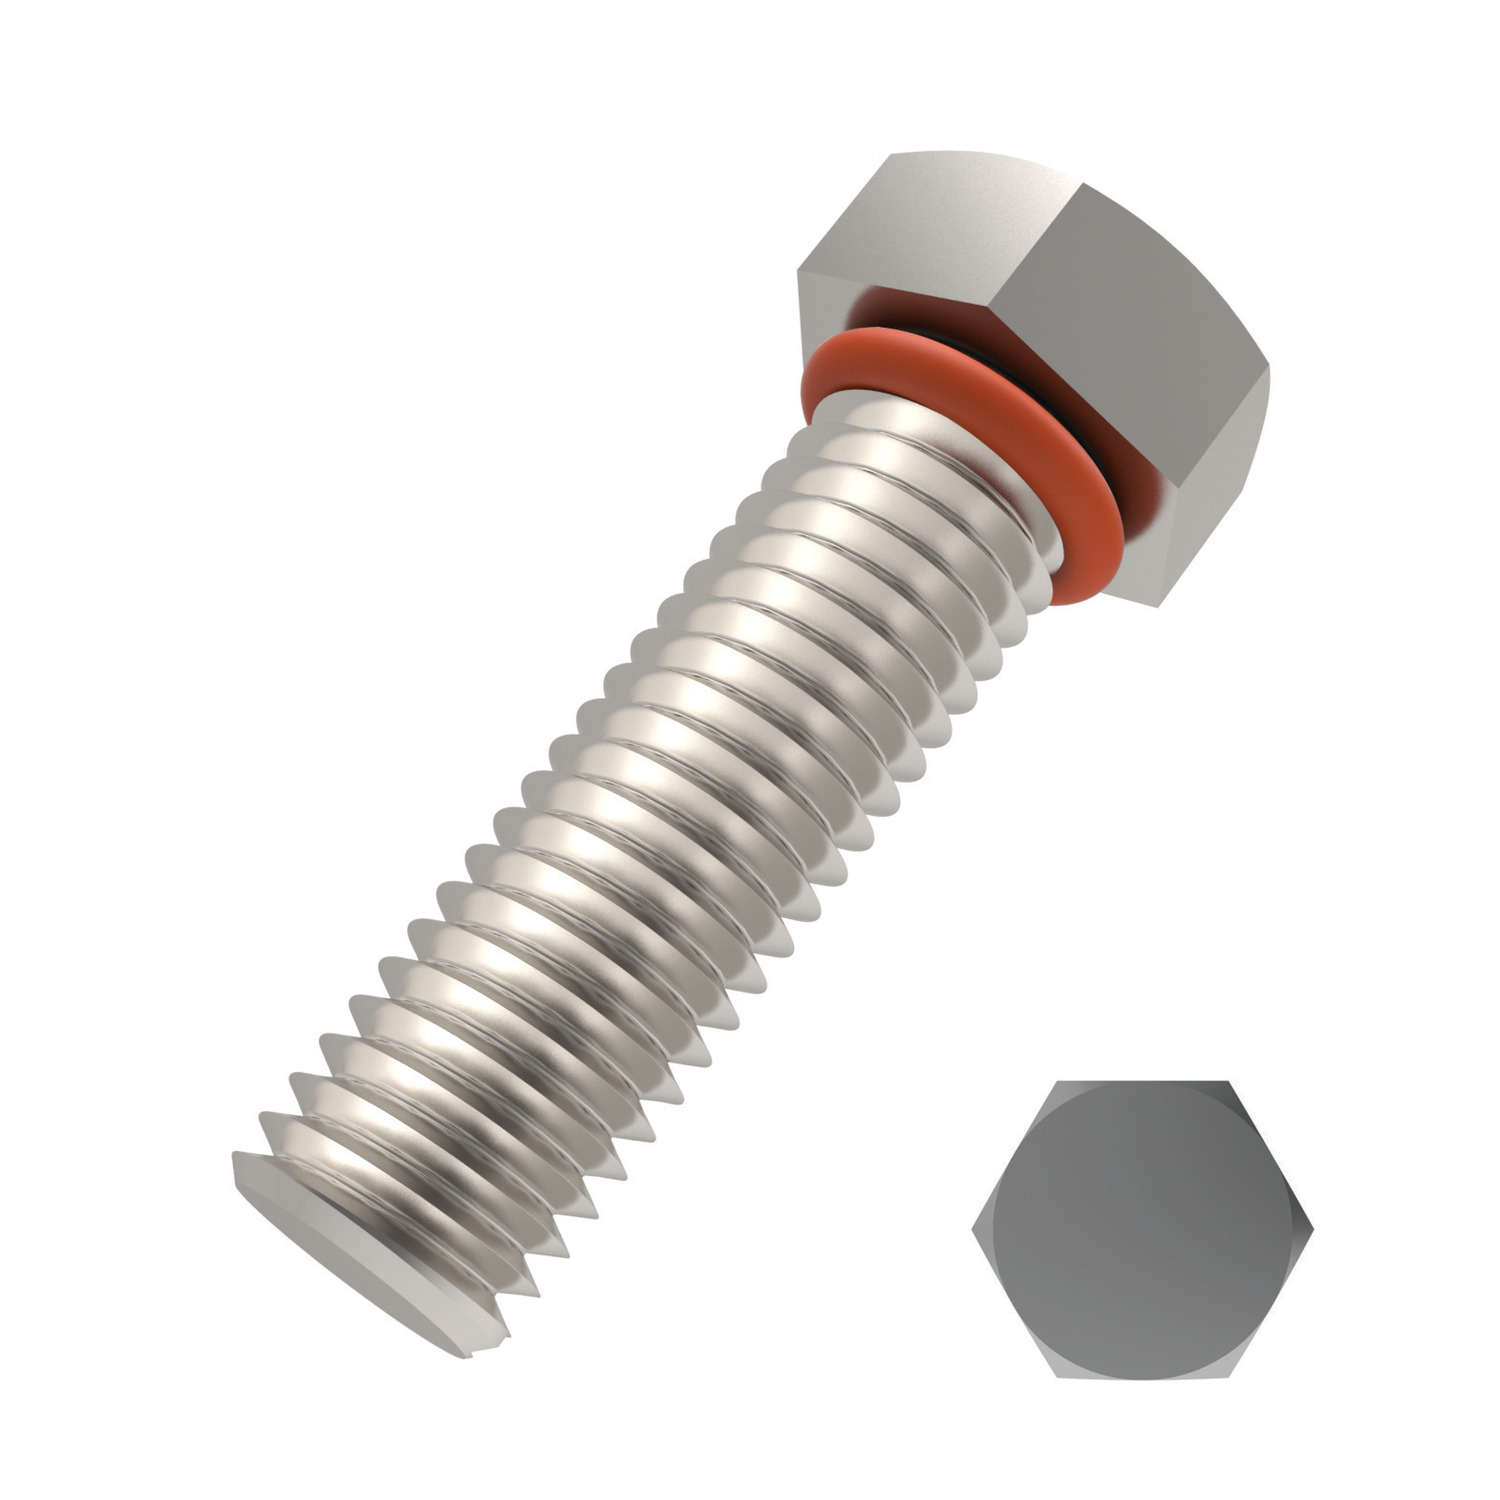 Integral Seal Bolts Integral seal bolt sizes range from M2 to M12